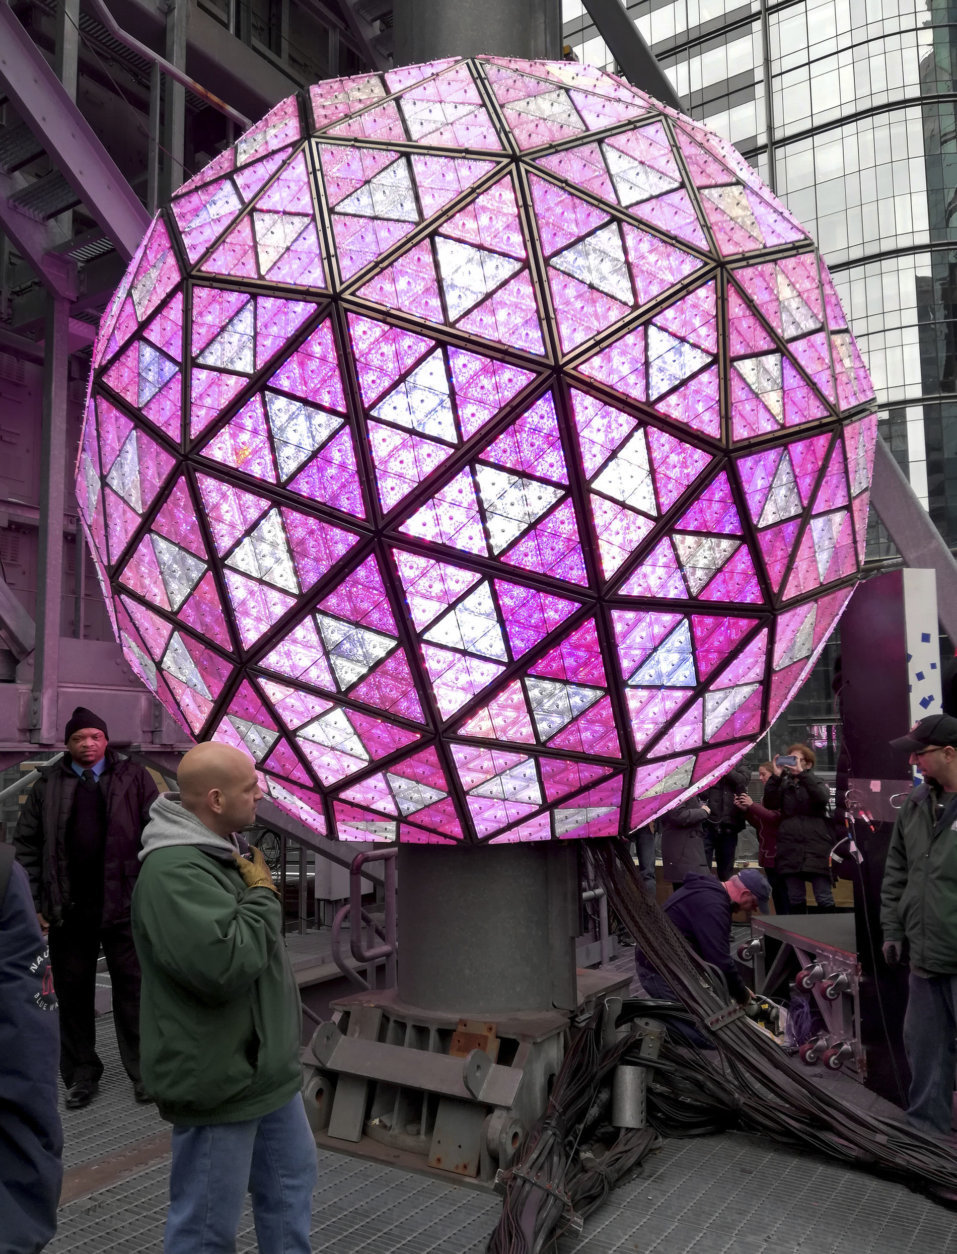 Workers in New York's Times Square perform a test on Sunday, Dec. 30, 2018, of the New Year's Eve ball that will be lit and sent up a 130-foot pole atop One Times Square to mark the start of the 2019 new year. Organizers of the annual event say the ball, illuminated by LEDs and enhanced by Waterford Crystal triangles, is capable of displaying a palette of more than 16 million vibrant colors and billions of patterns to create a spectacular kaleidoscope effect. (AP Photo/Julie Walker)